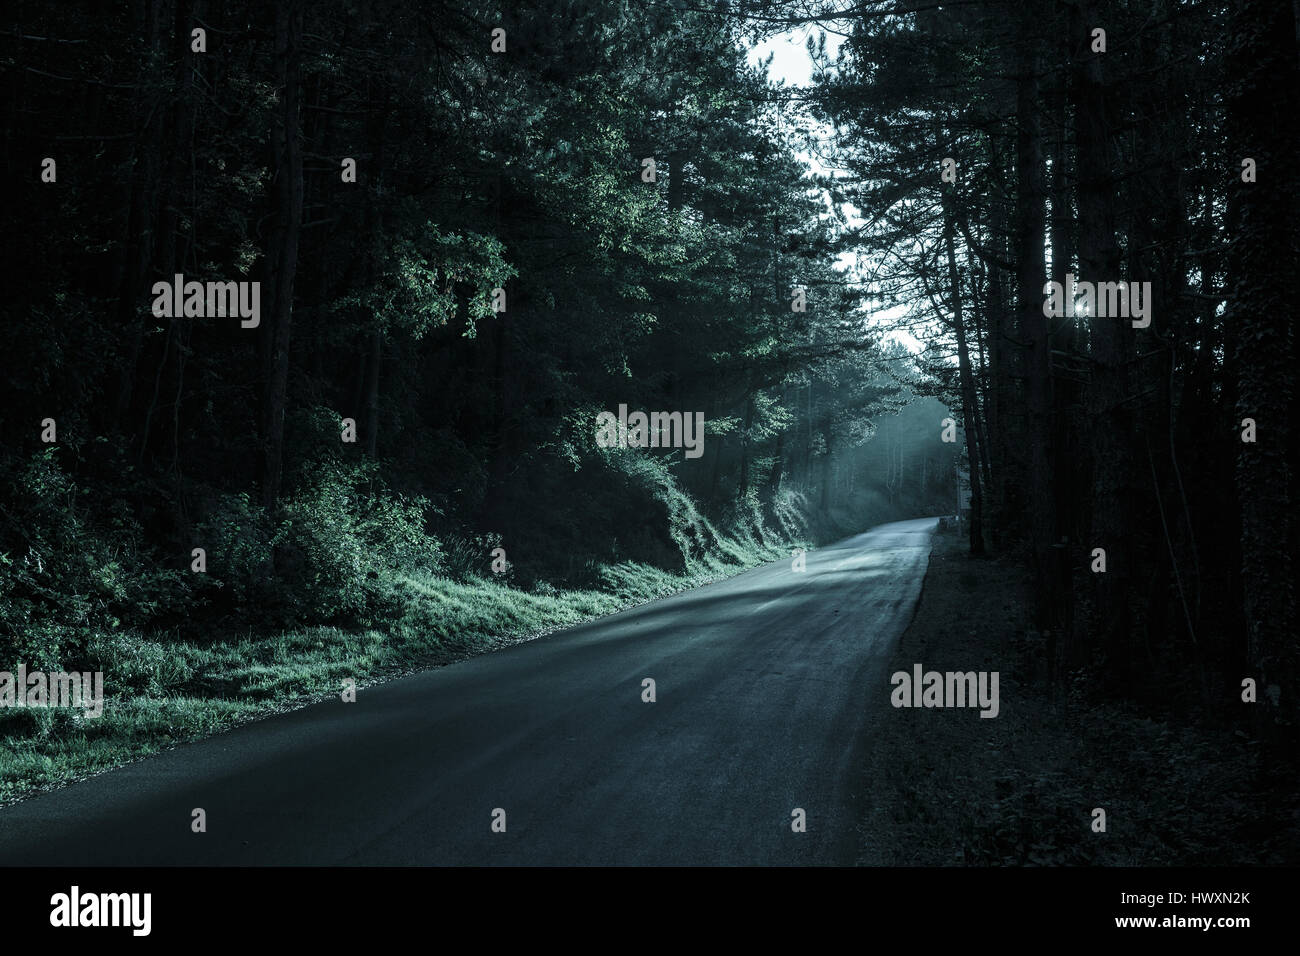 Spooky dark forest with empty road in receding light. Emotional, gothic background, eerie natural scene concept. Stock Photo